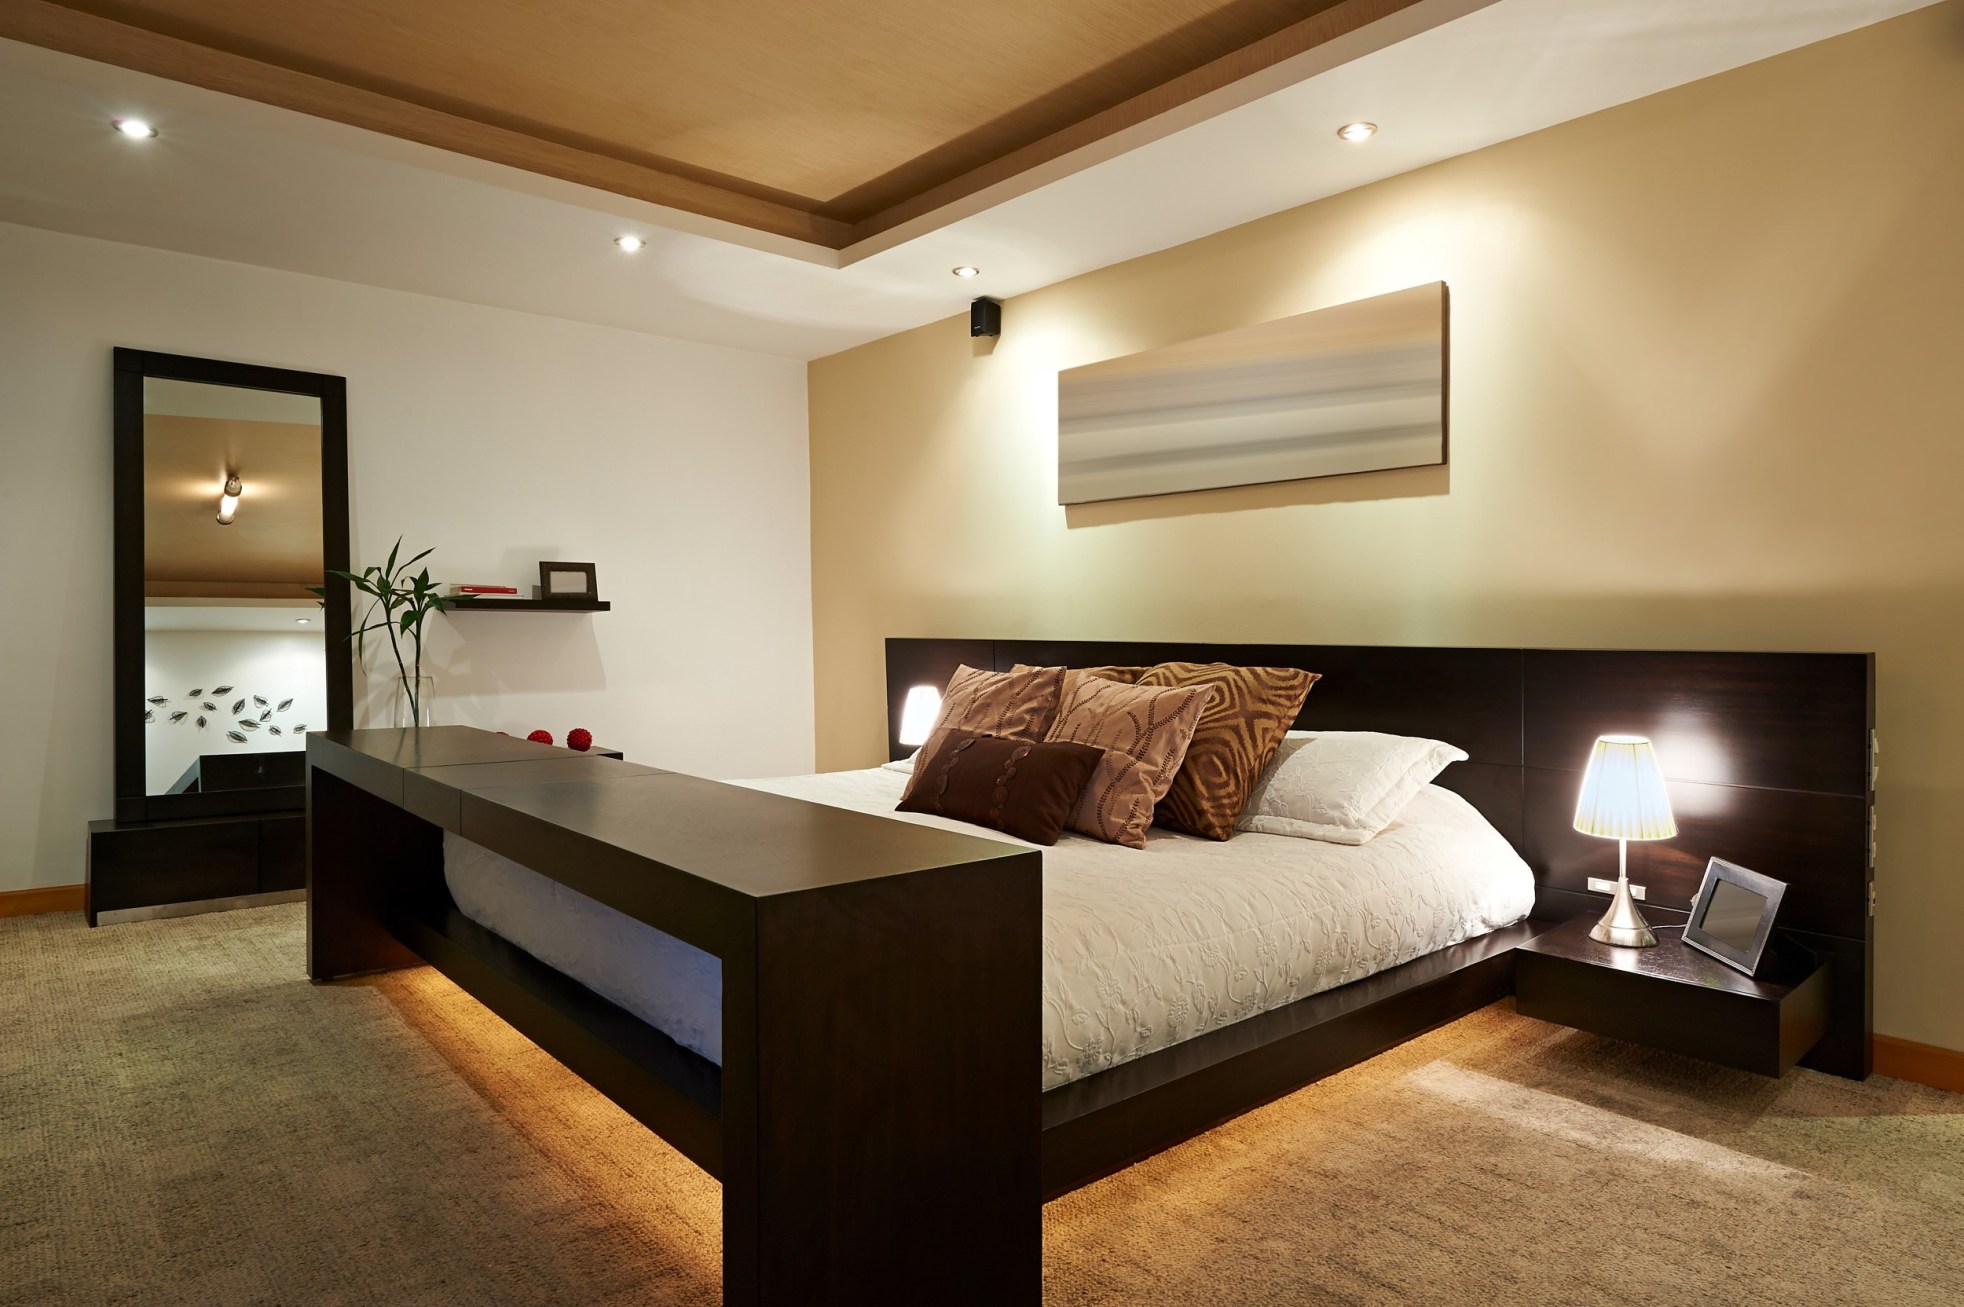 Brown Color as an Accent in the Bedroom